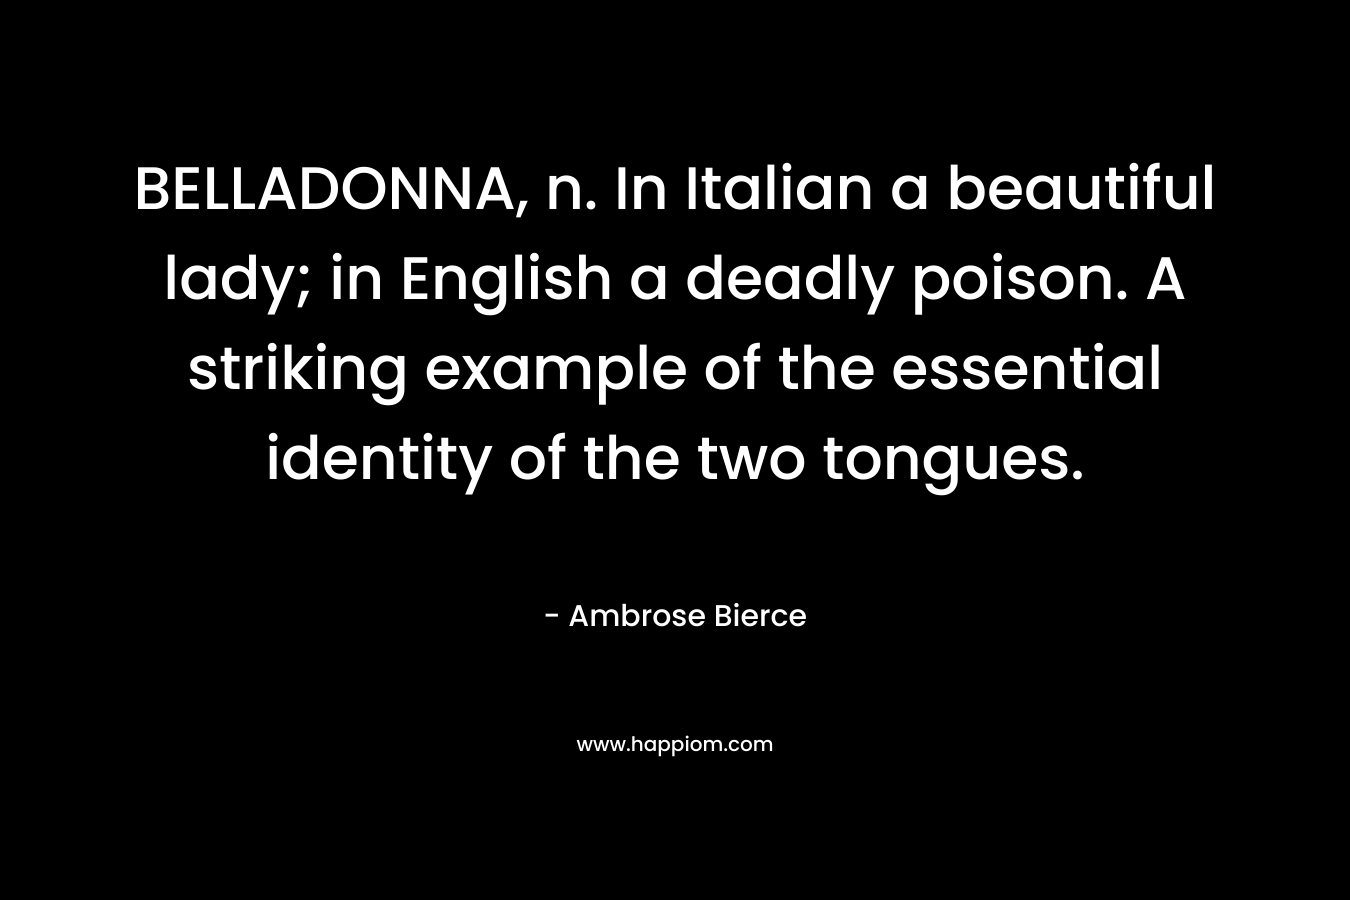 BELLADONNA, n. In Italian a beautiful lady; in English a deadly poison. A striking example of the essential identity of the two tongues.